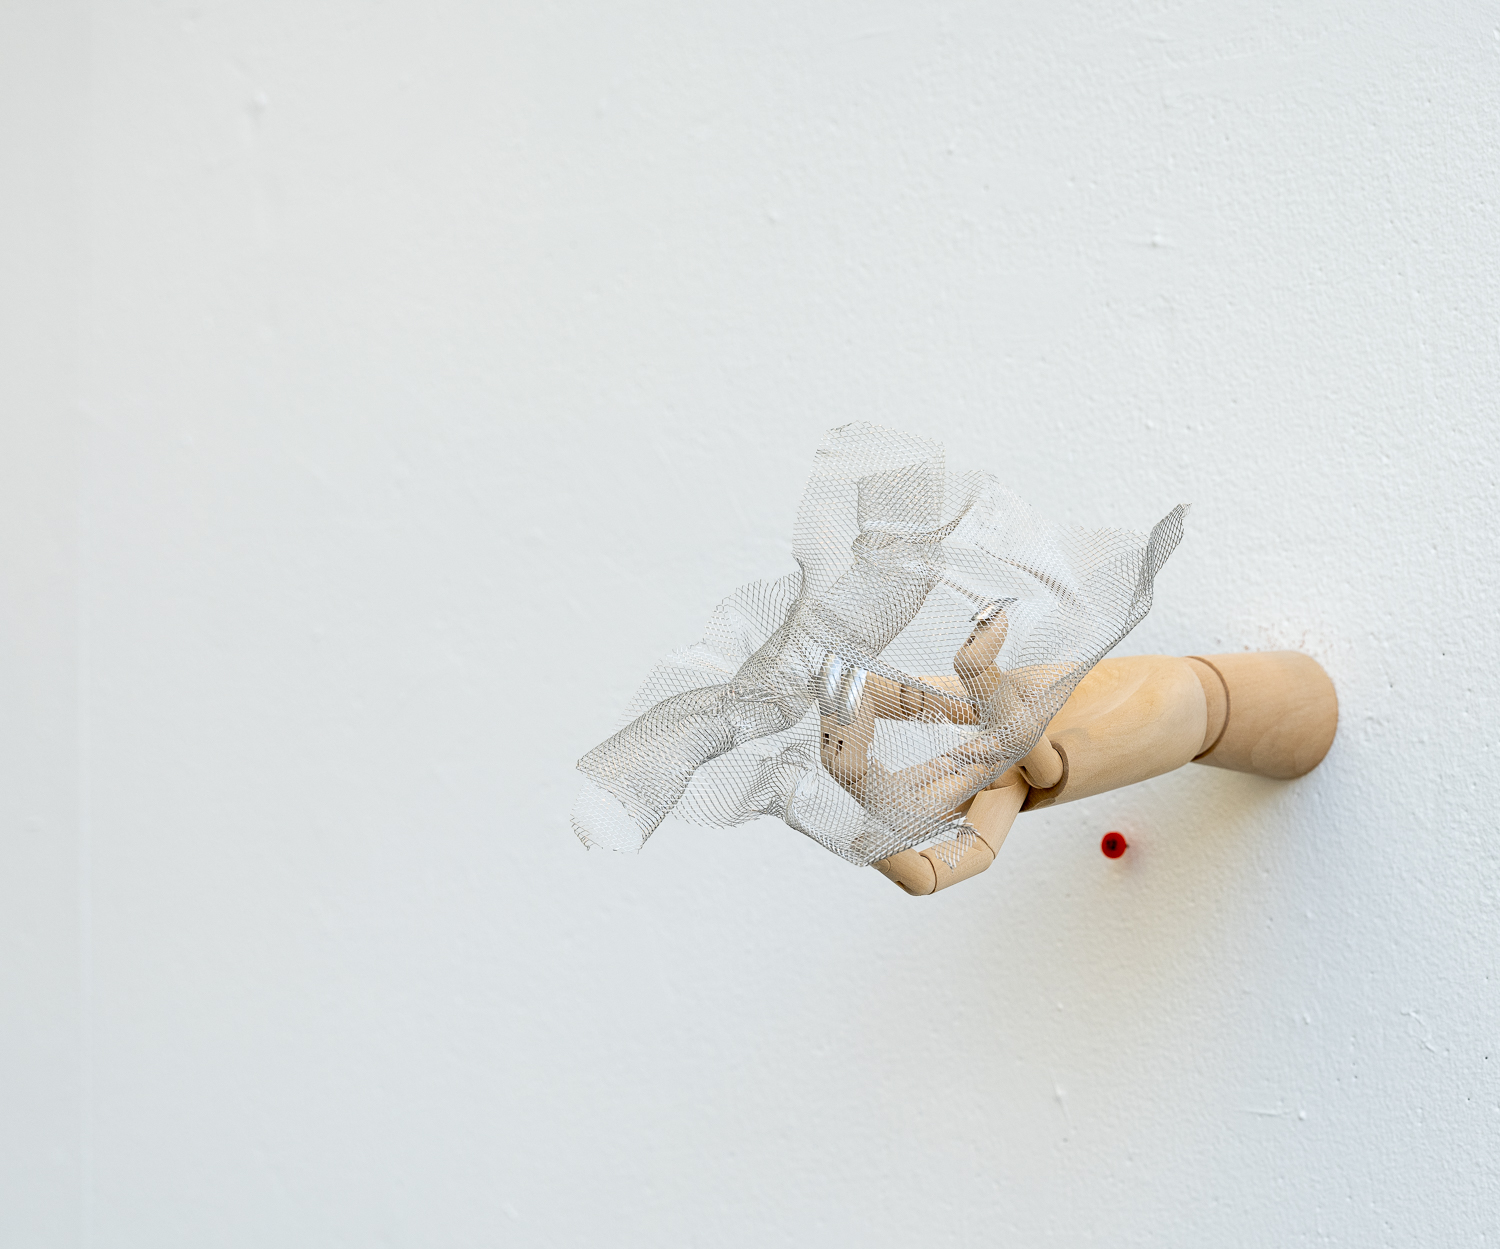 A wooden hand sticking out of the wall holds a crumpled piece of a mesh material